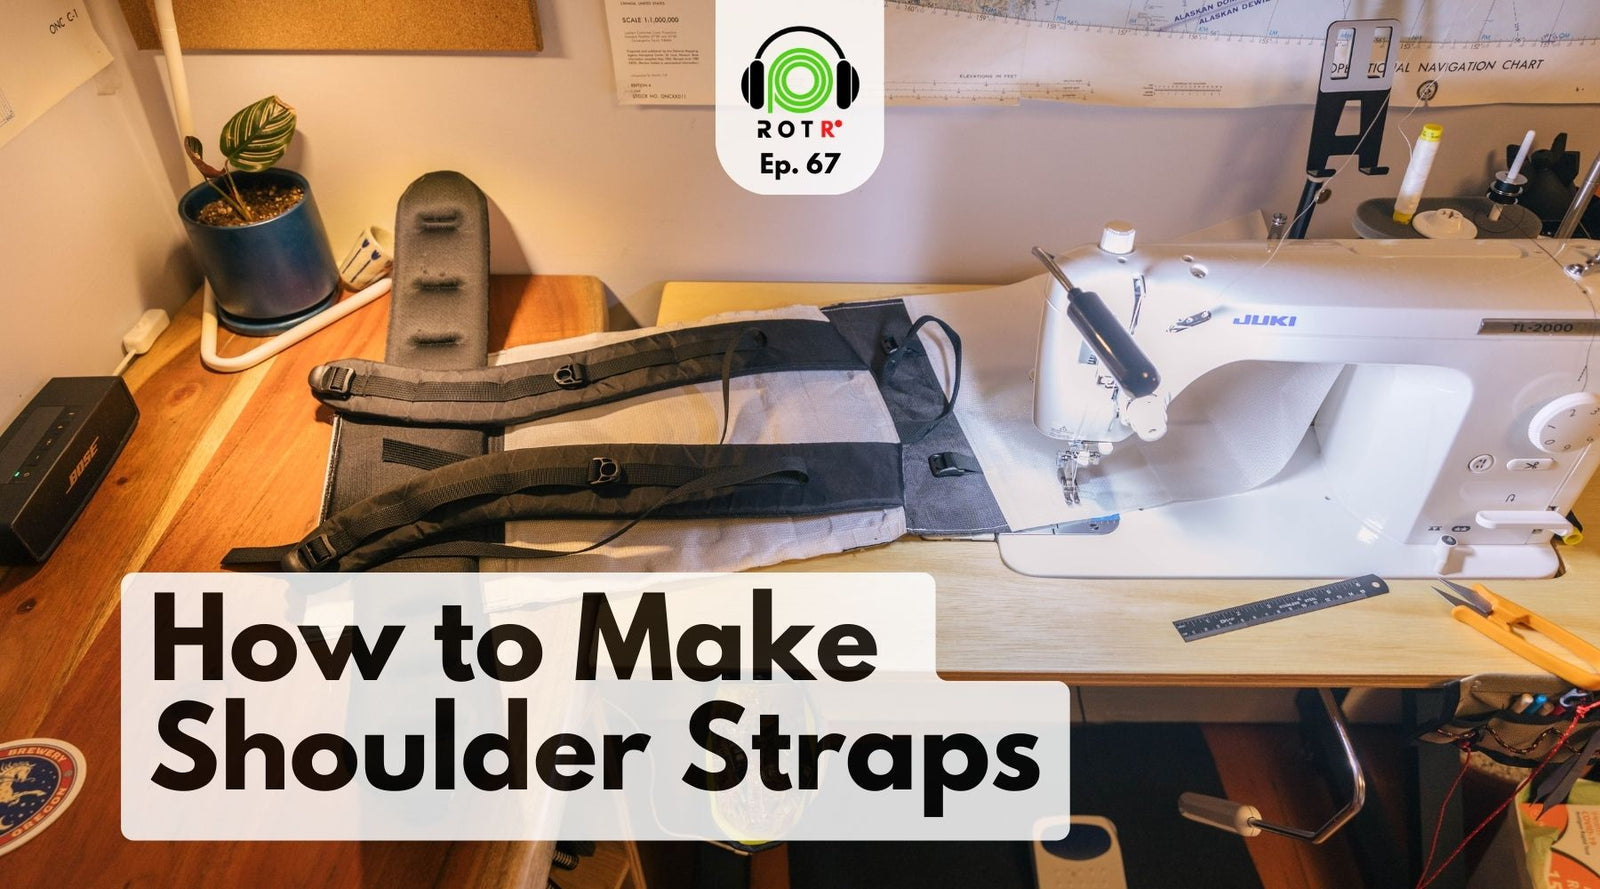 how to sew a strap holder. so handy for holding up straps as well